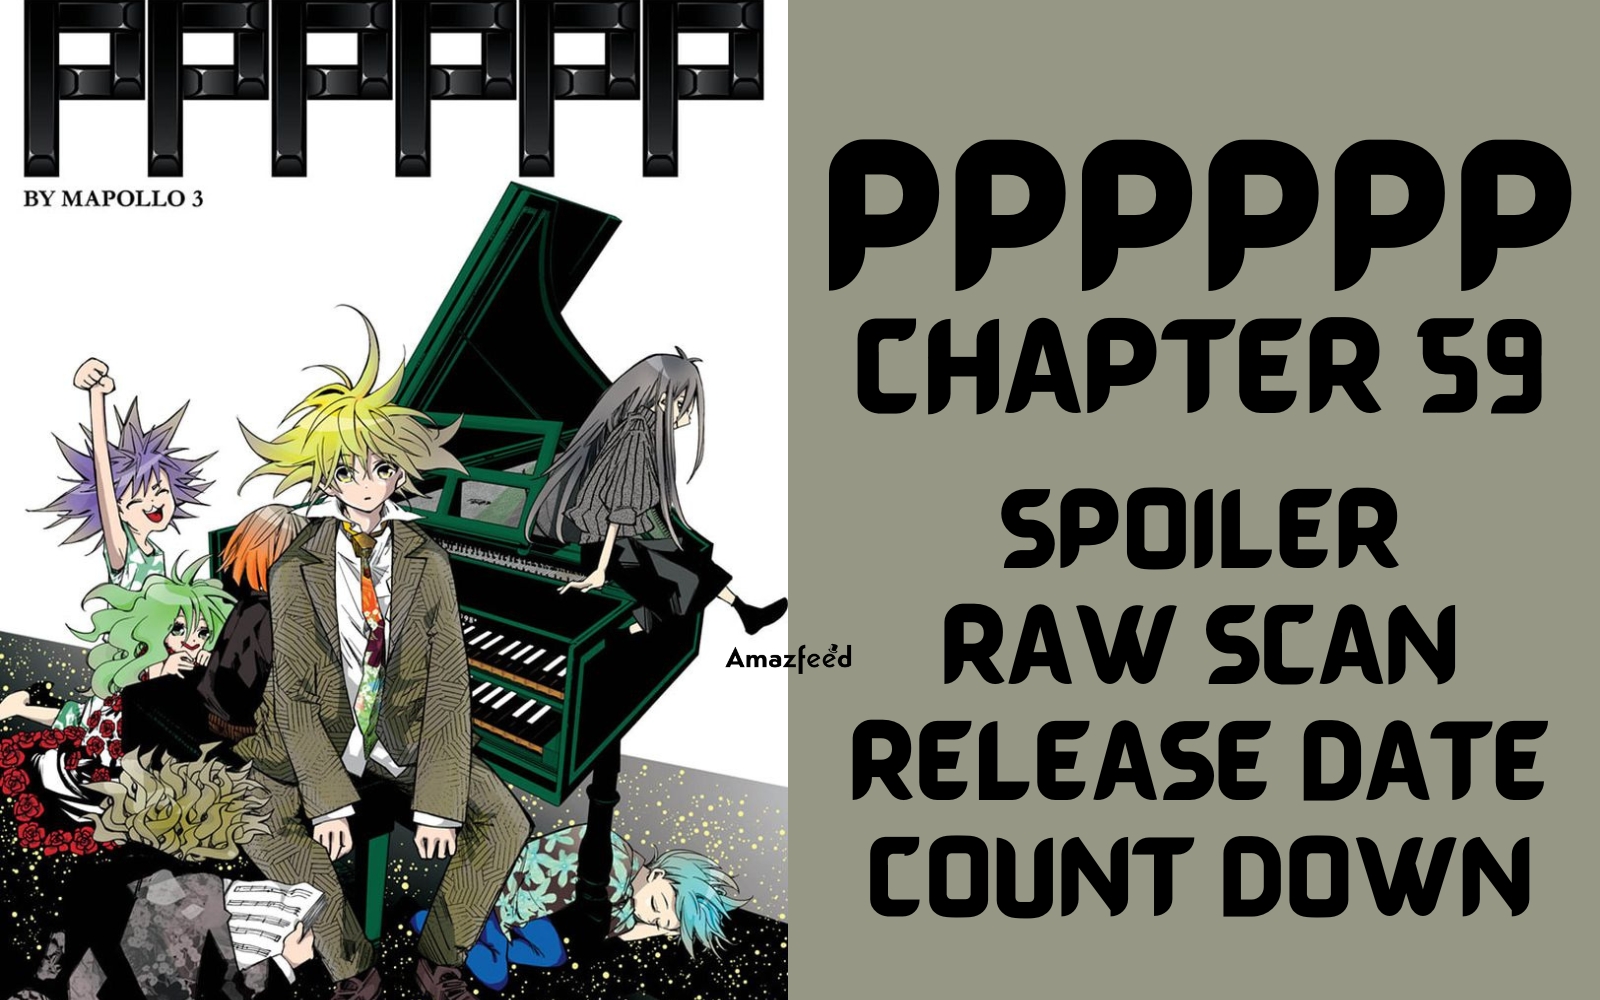 PPPPPP Chapter 59 Spoiler, Raw Scan, Color Page, Release Date & Everything You Want to Know